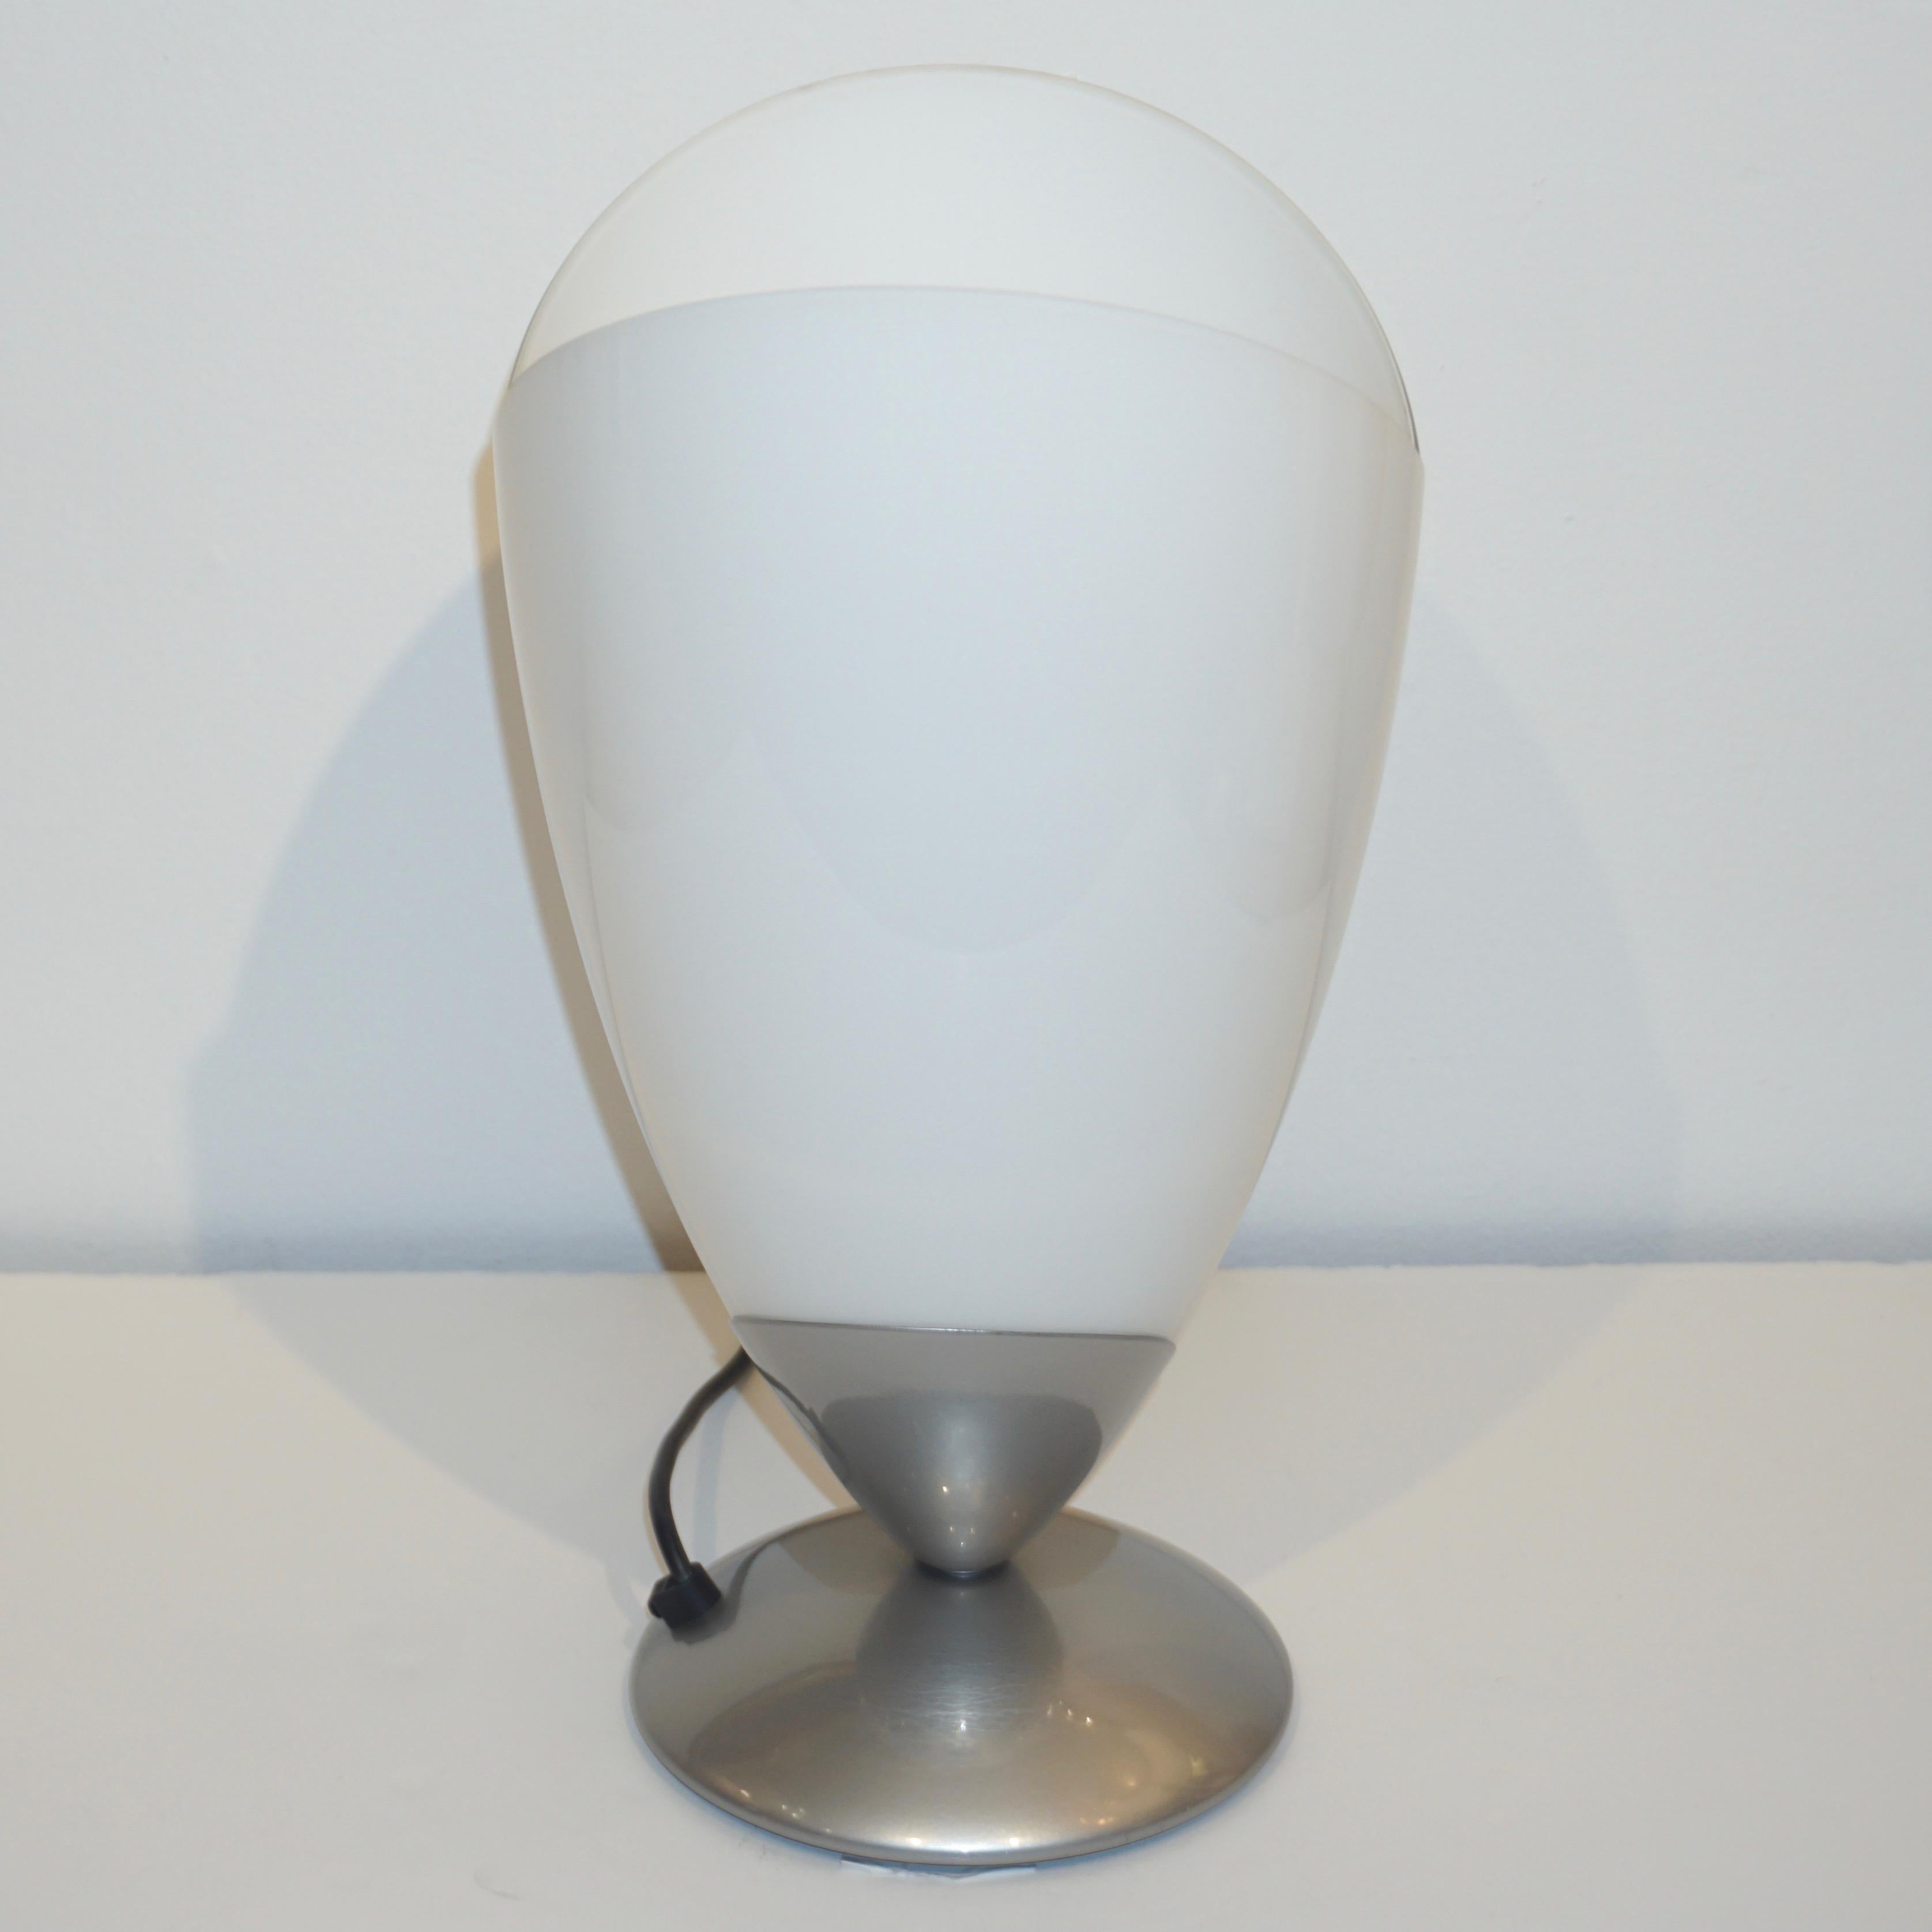 1970s Italian Pair of Satin Nickel & White Glass Organic Tulip Lamps by Tronconi For Sale 2